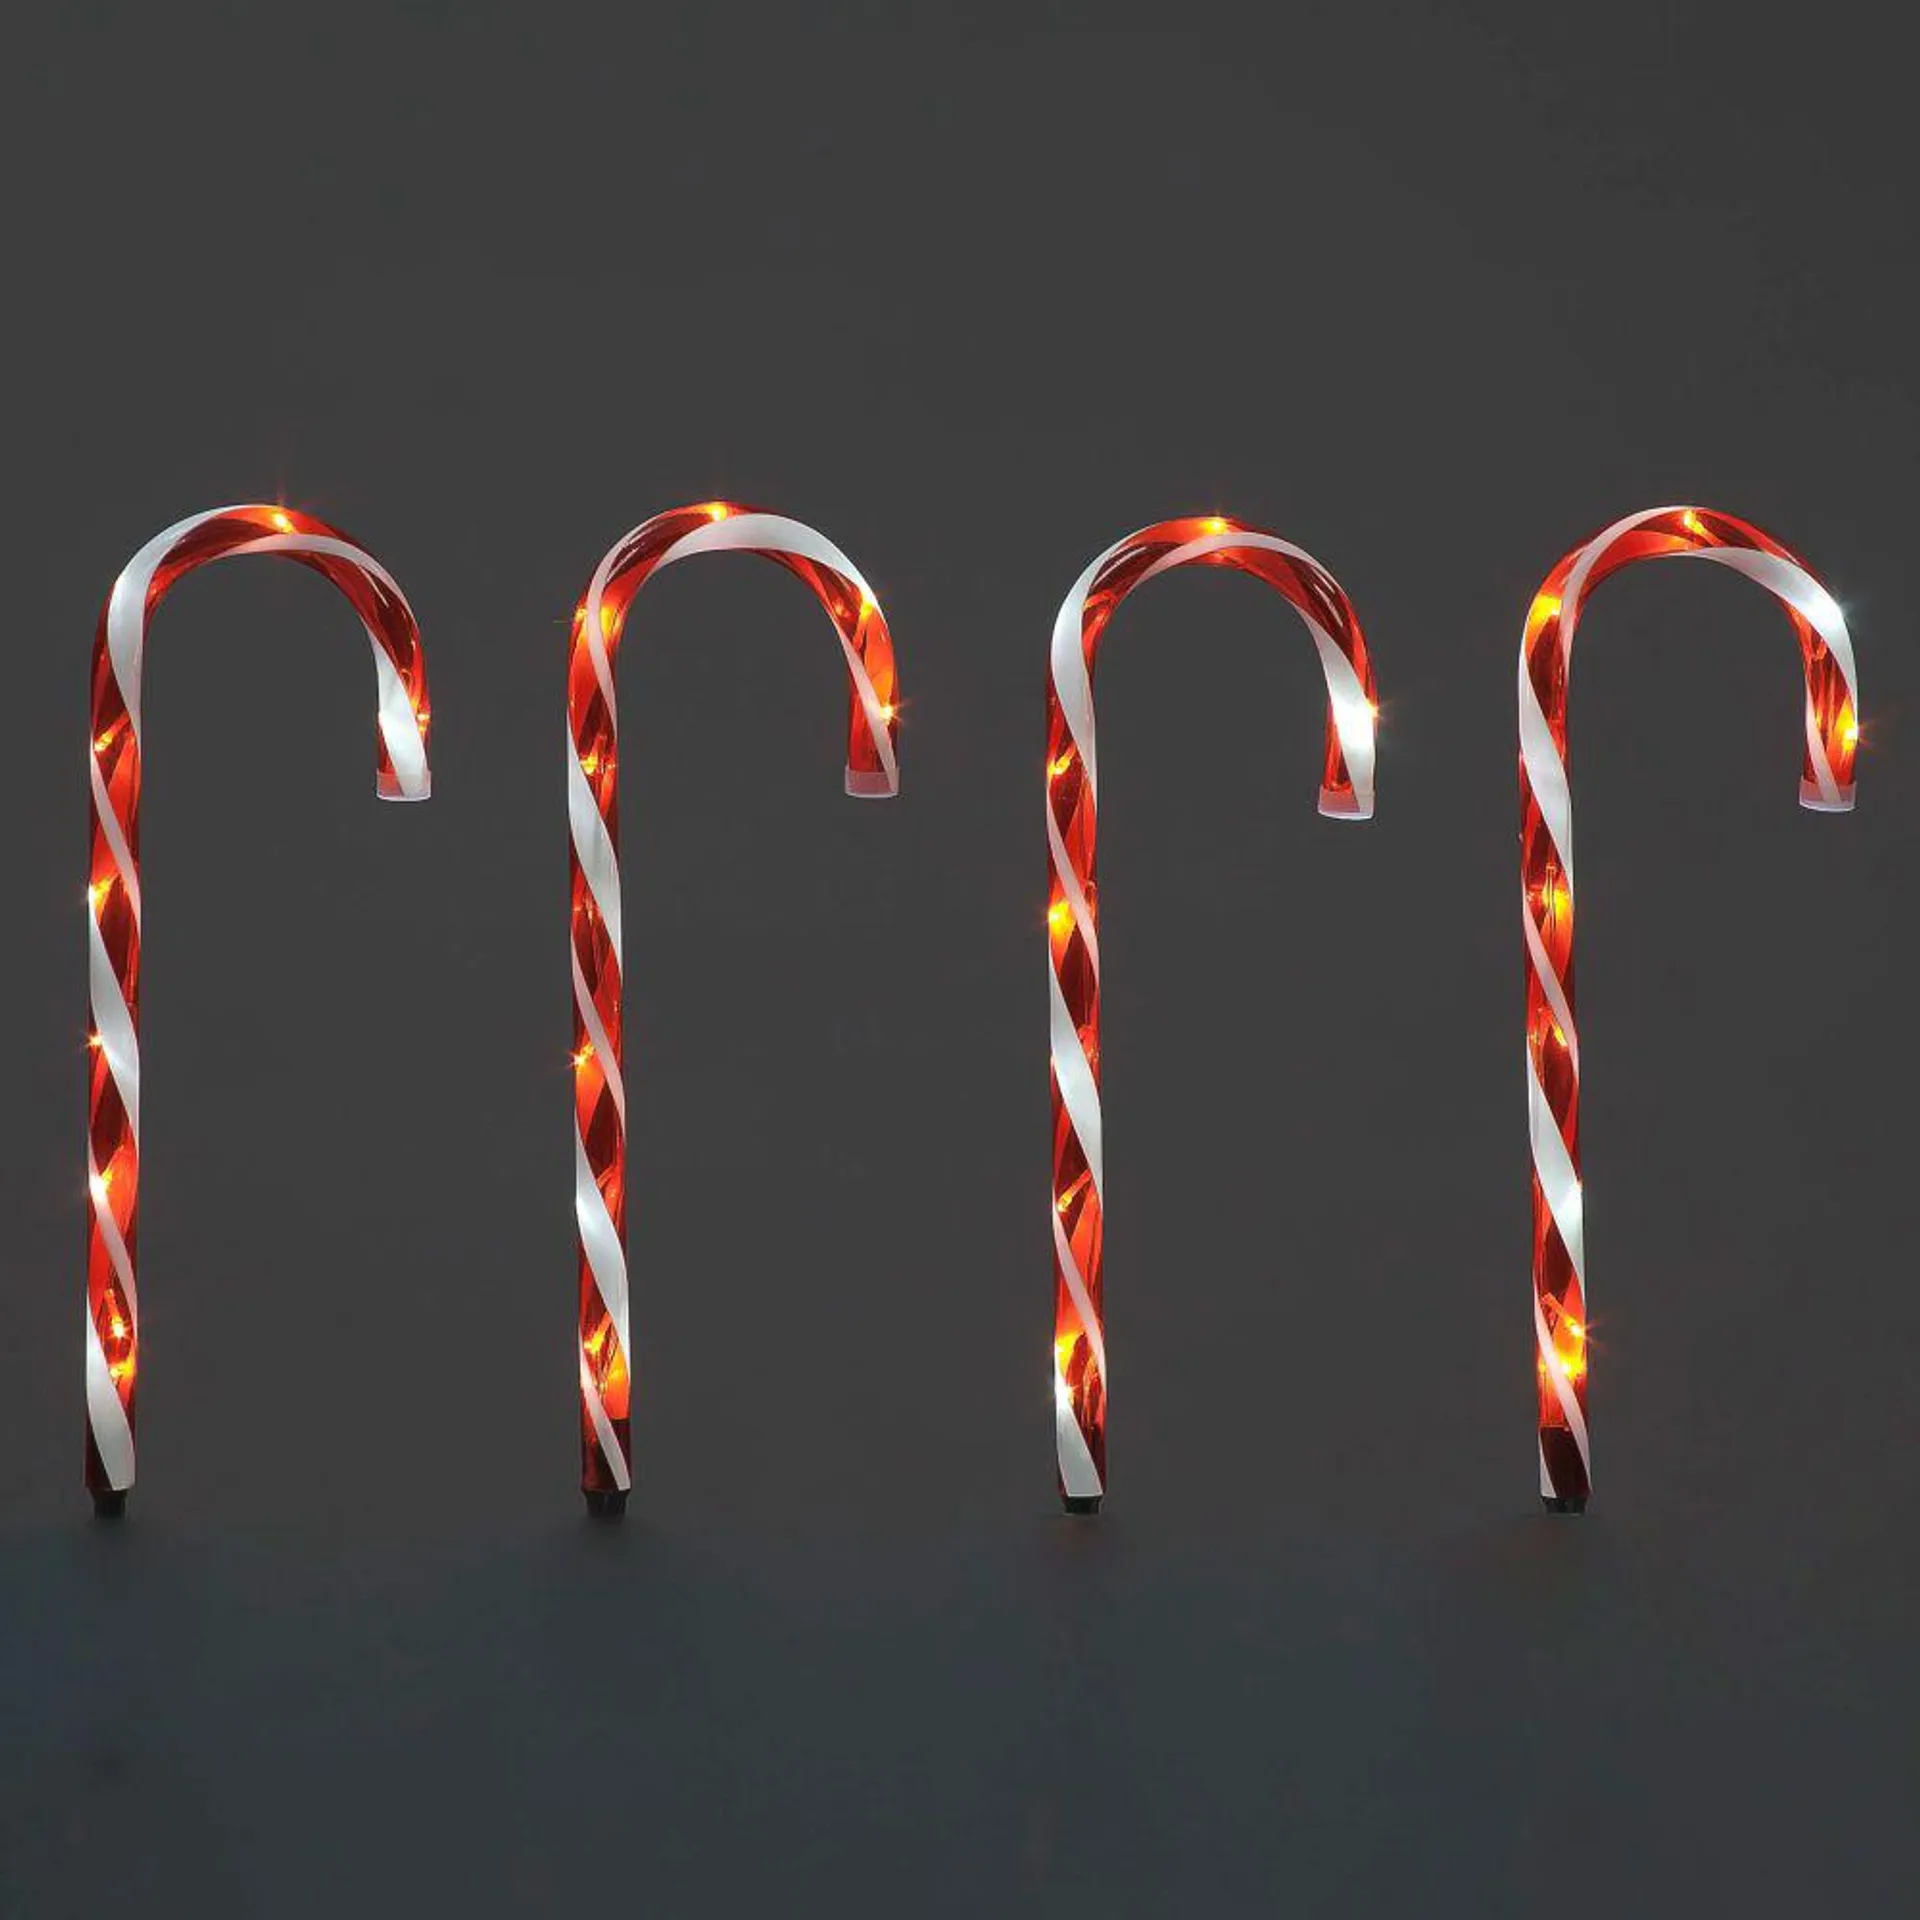 Set of 4 62cm Candy Cane light up Christmas decorations with Timer - Battery operated